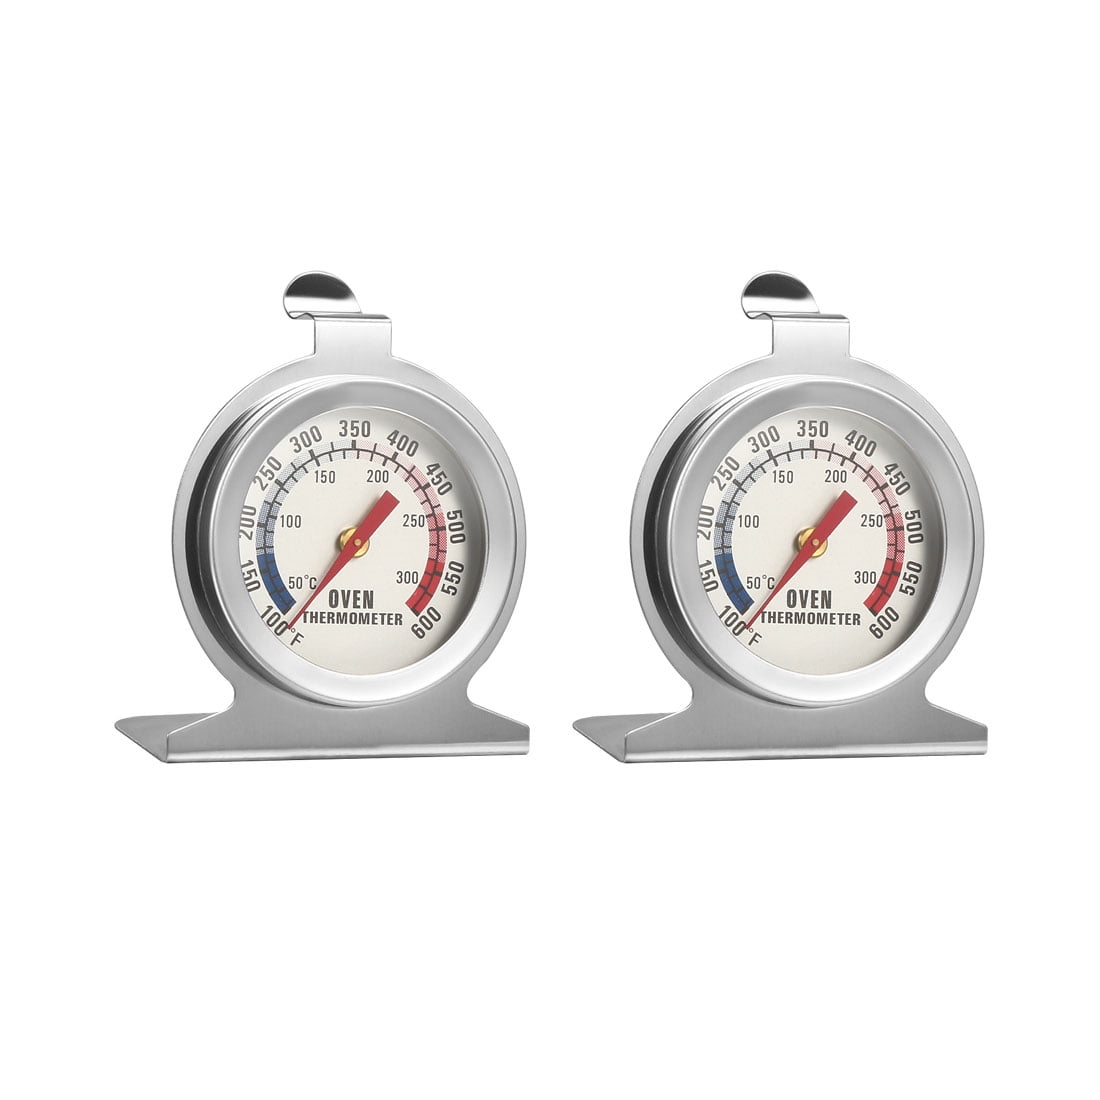 Unique Bargains Oven 100-600F Stainless Steel Instant Read Thermometer Gauge 2 Pcs, Size: 2.95 inch x 2.36 inch x 1.57 inch